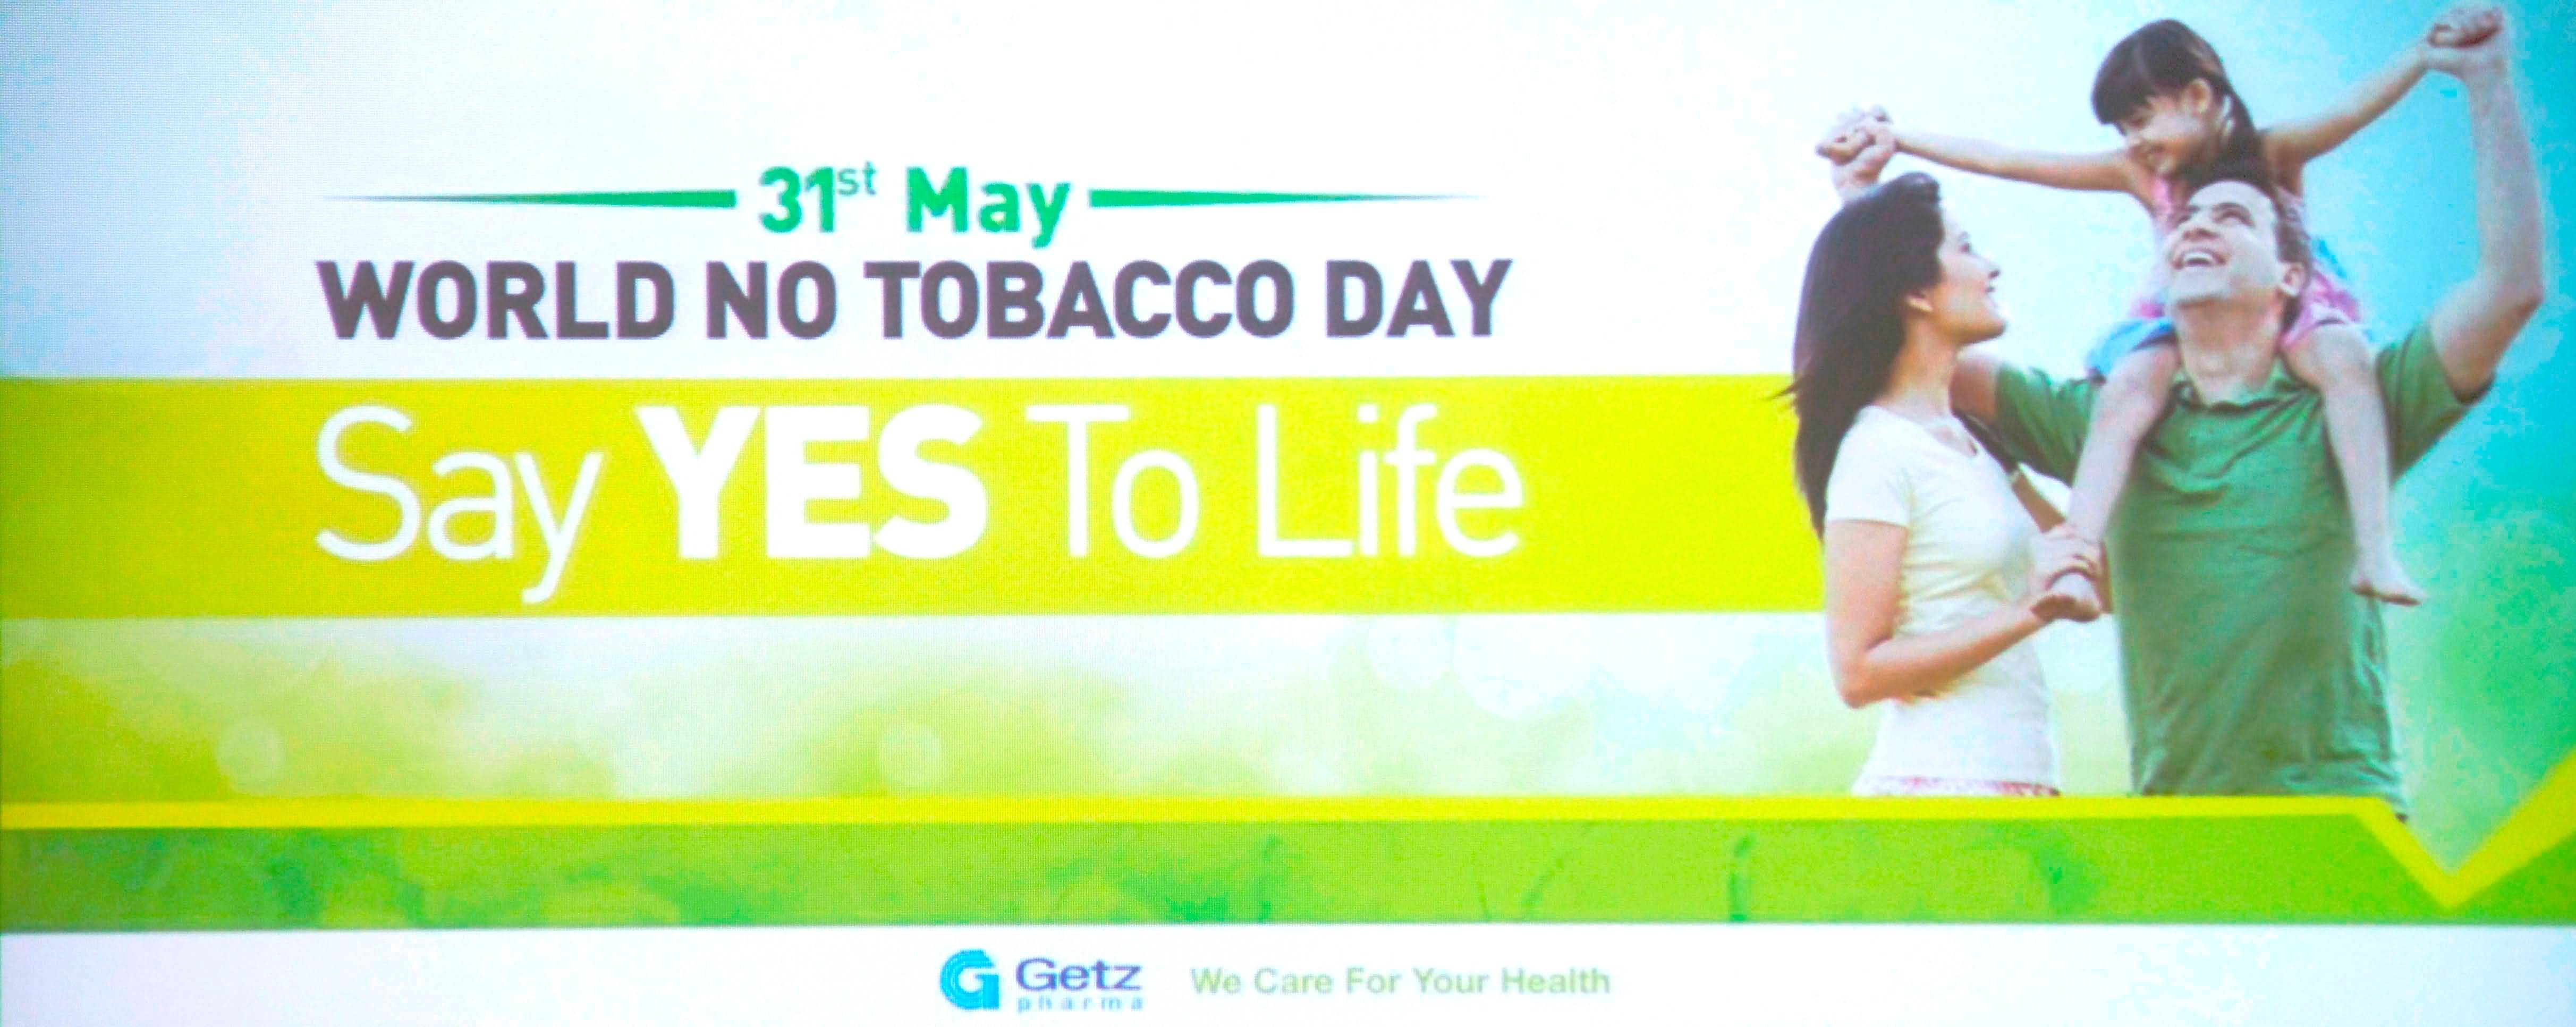 35+ Latest World No Tobacco Day Pictures & Slogans